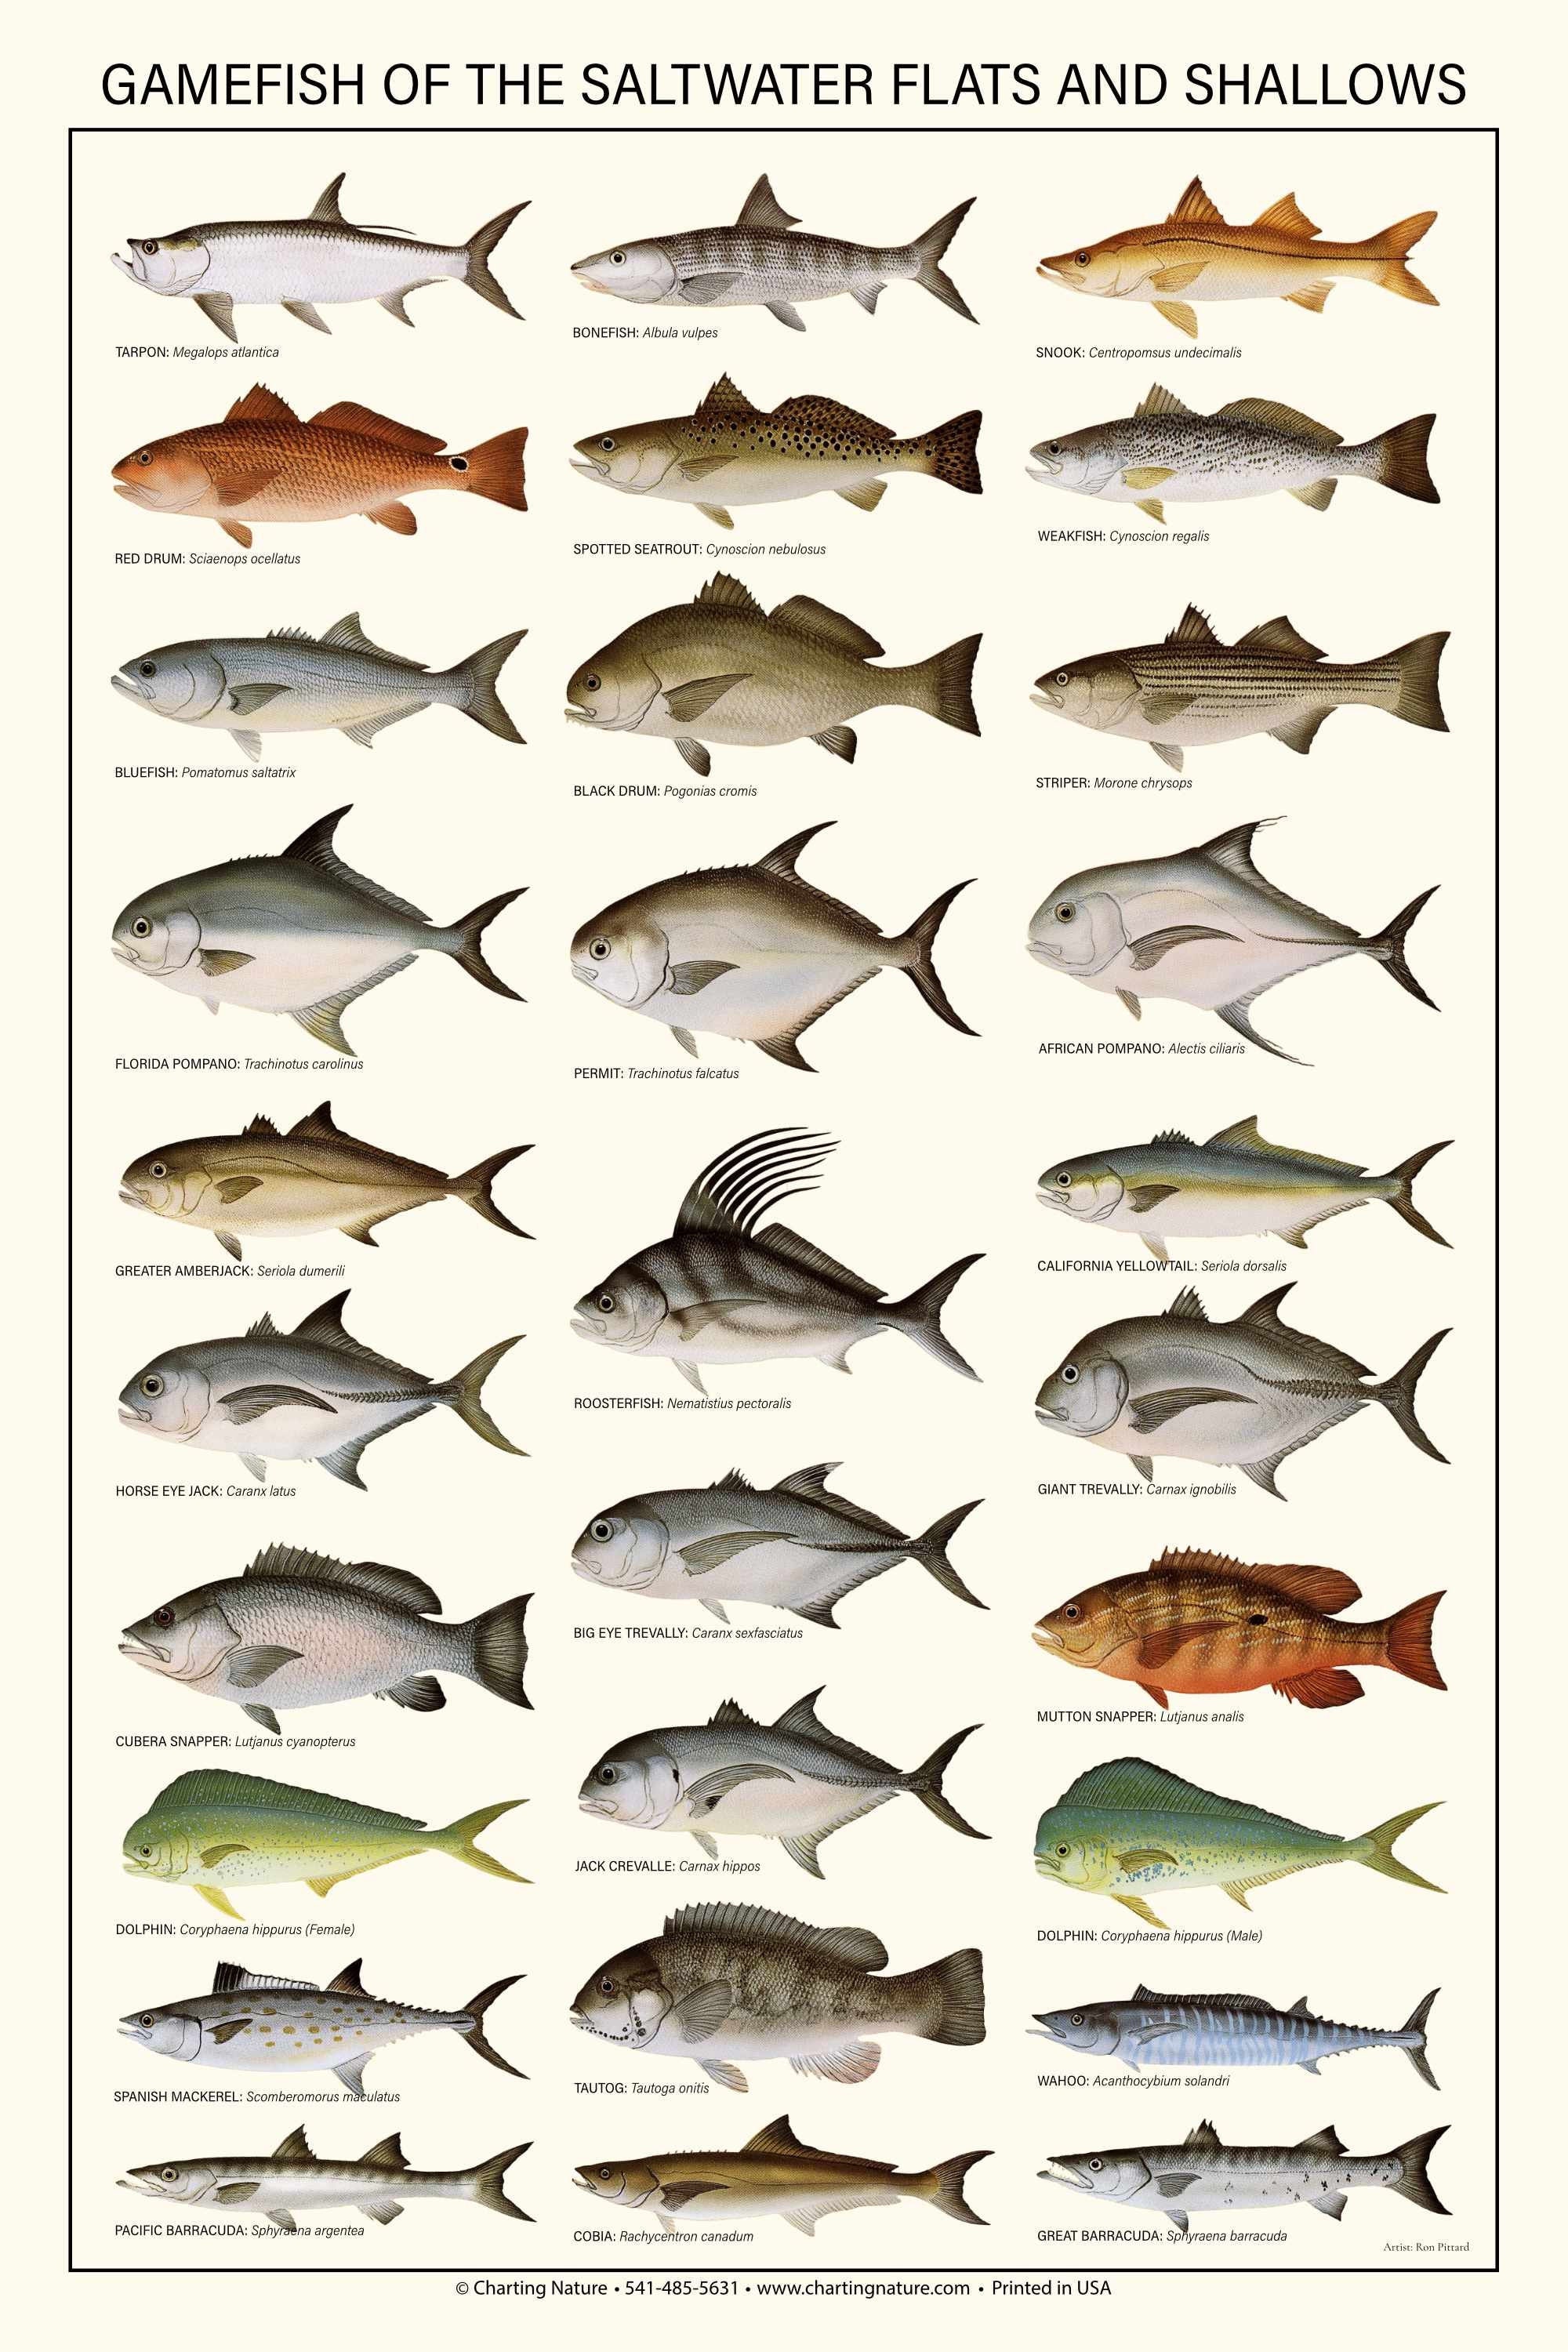 Saltwater Flats and Shallows Gamefish Poster, Identification Chart and  Fishermen Guide